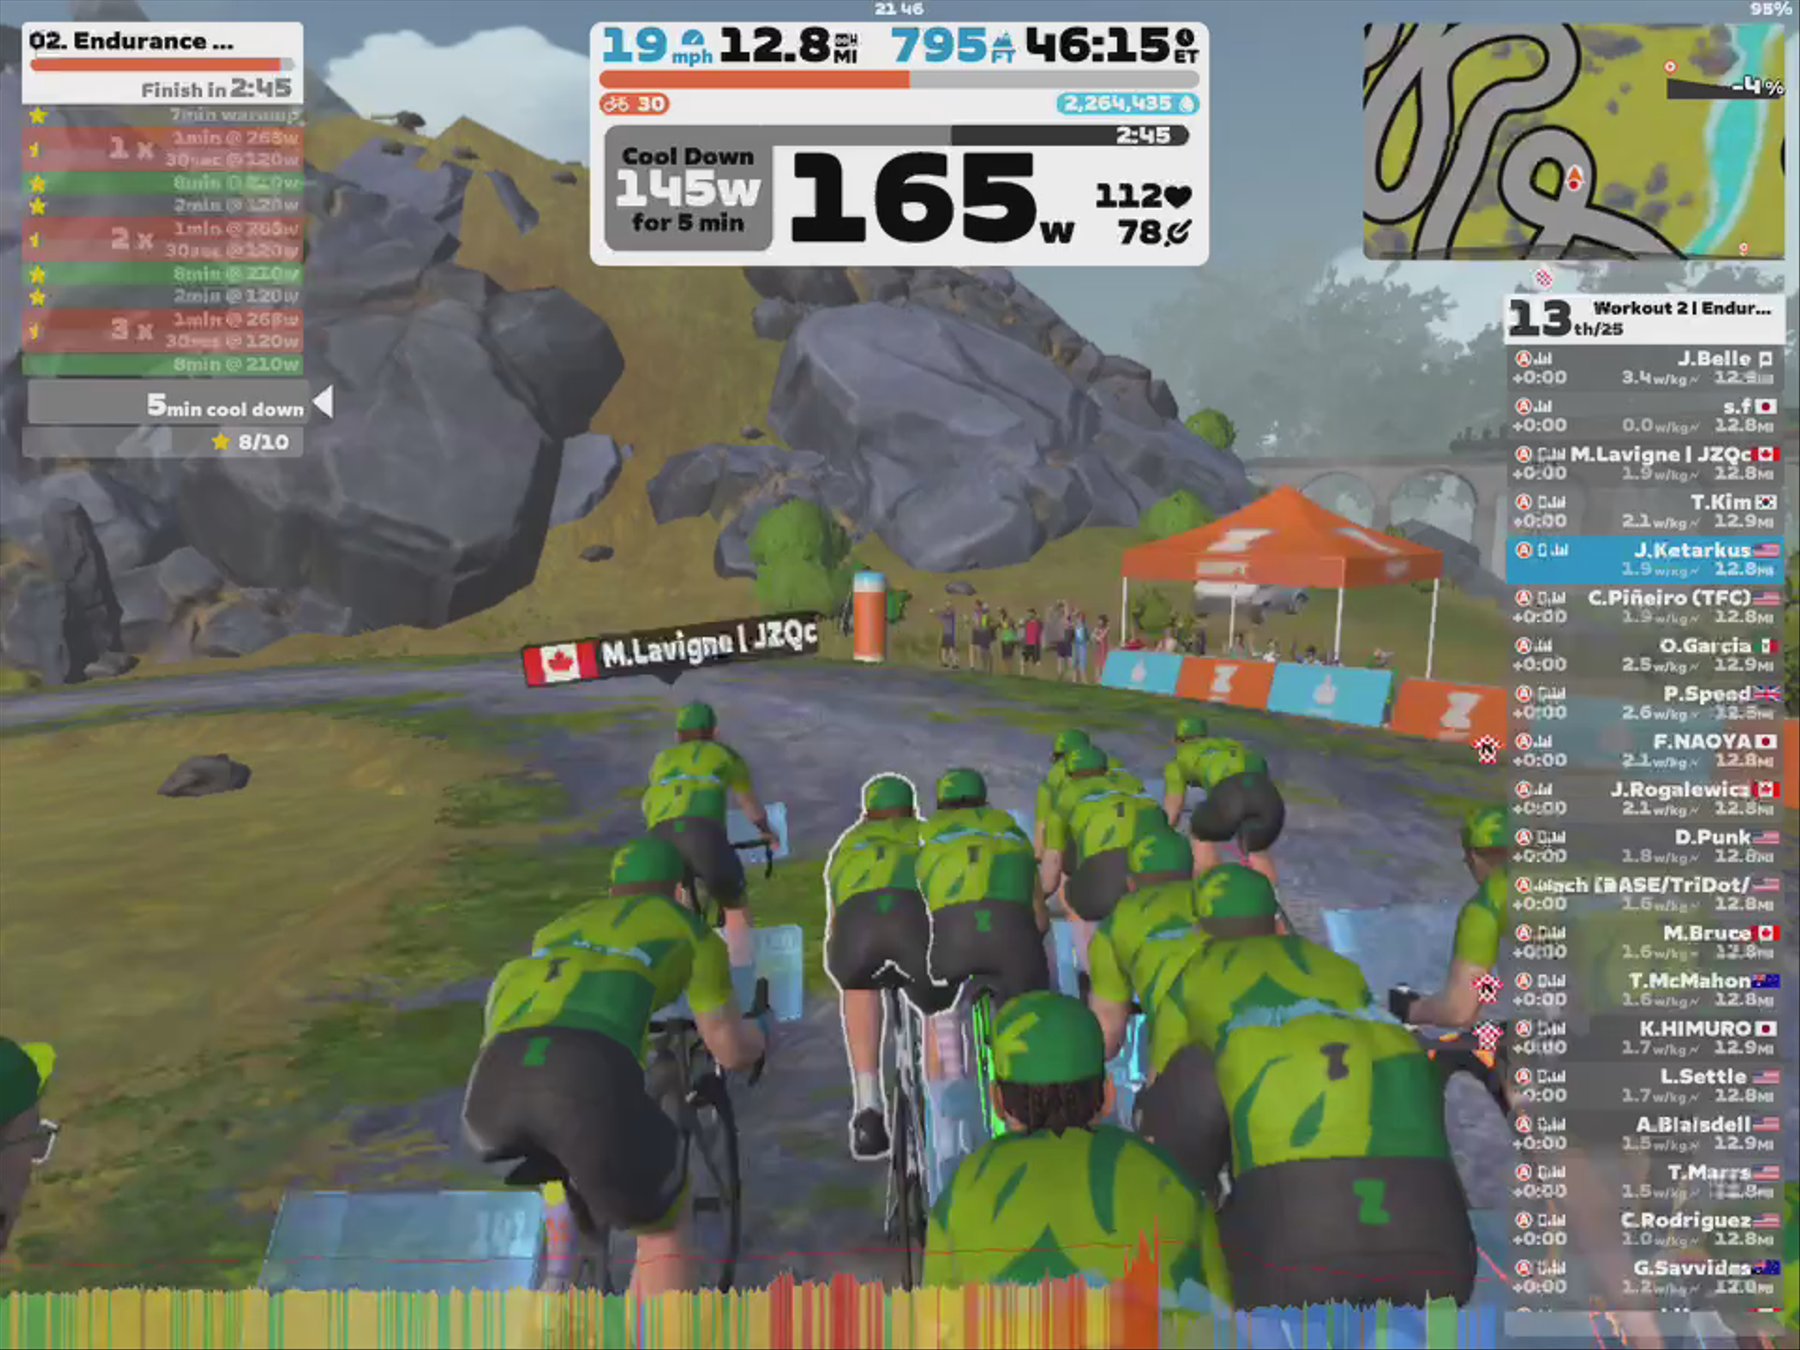 Zwift - Group Workout: Long - Endurance Escalator  on The Muckle Yin in Scotland